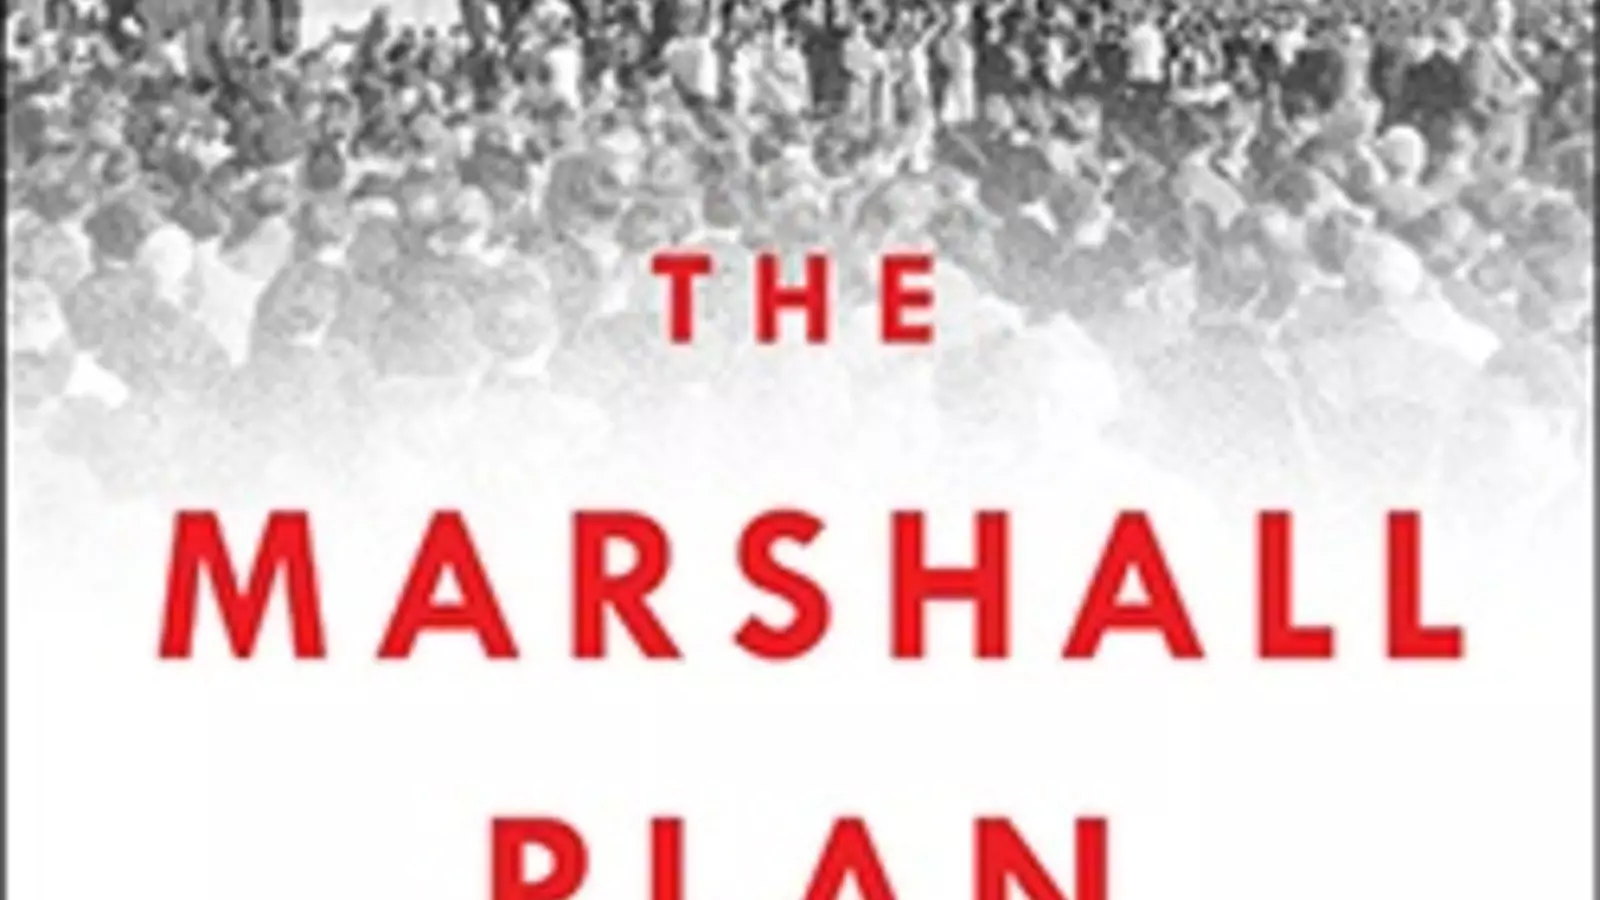 The Marshall Plan Holds Lessons For Present Tensions With Russia Benn Steil Writes In New Book Council On Foreign Relations